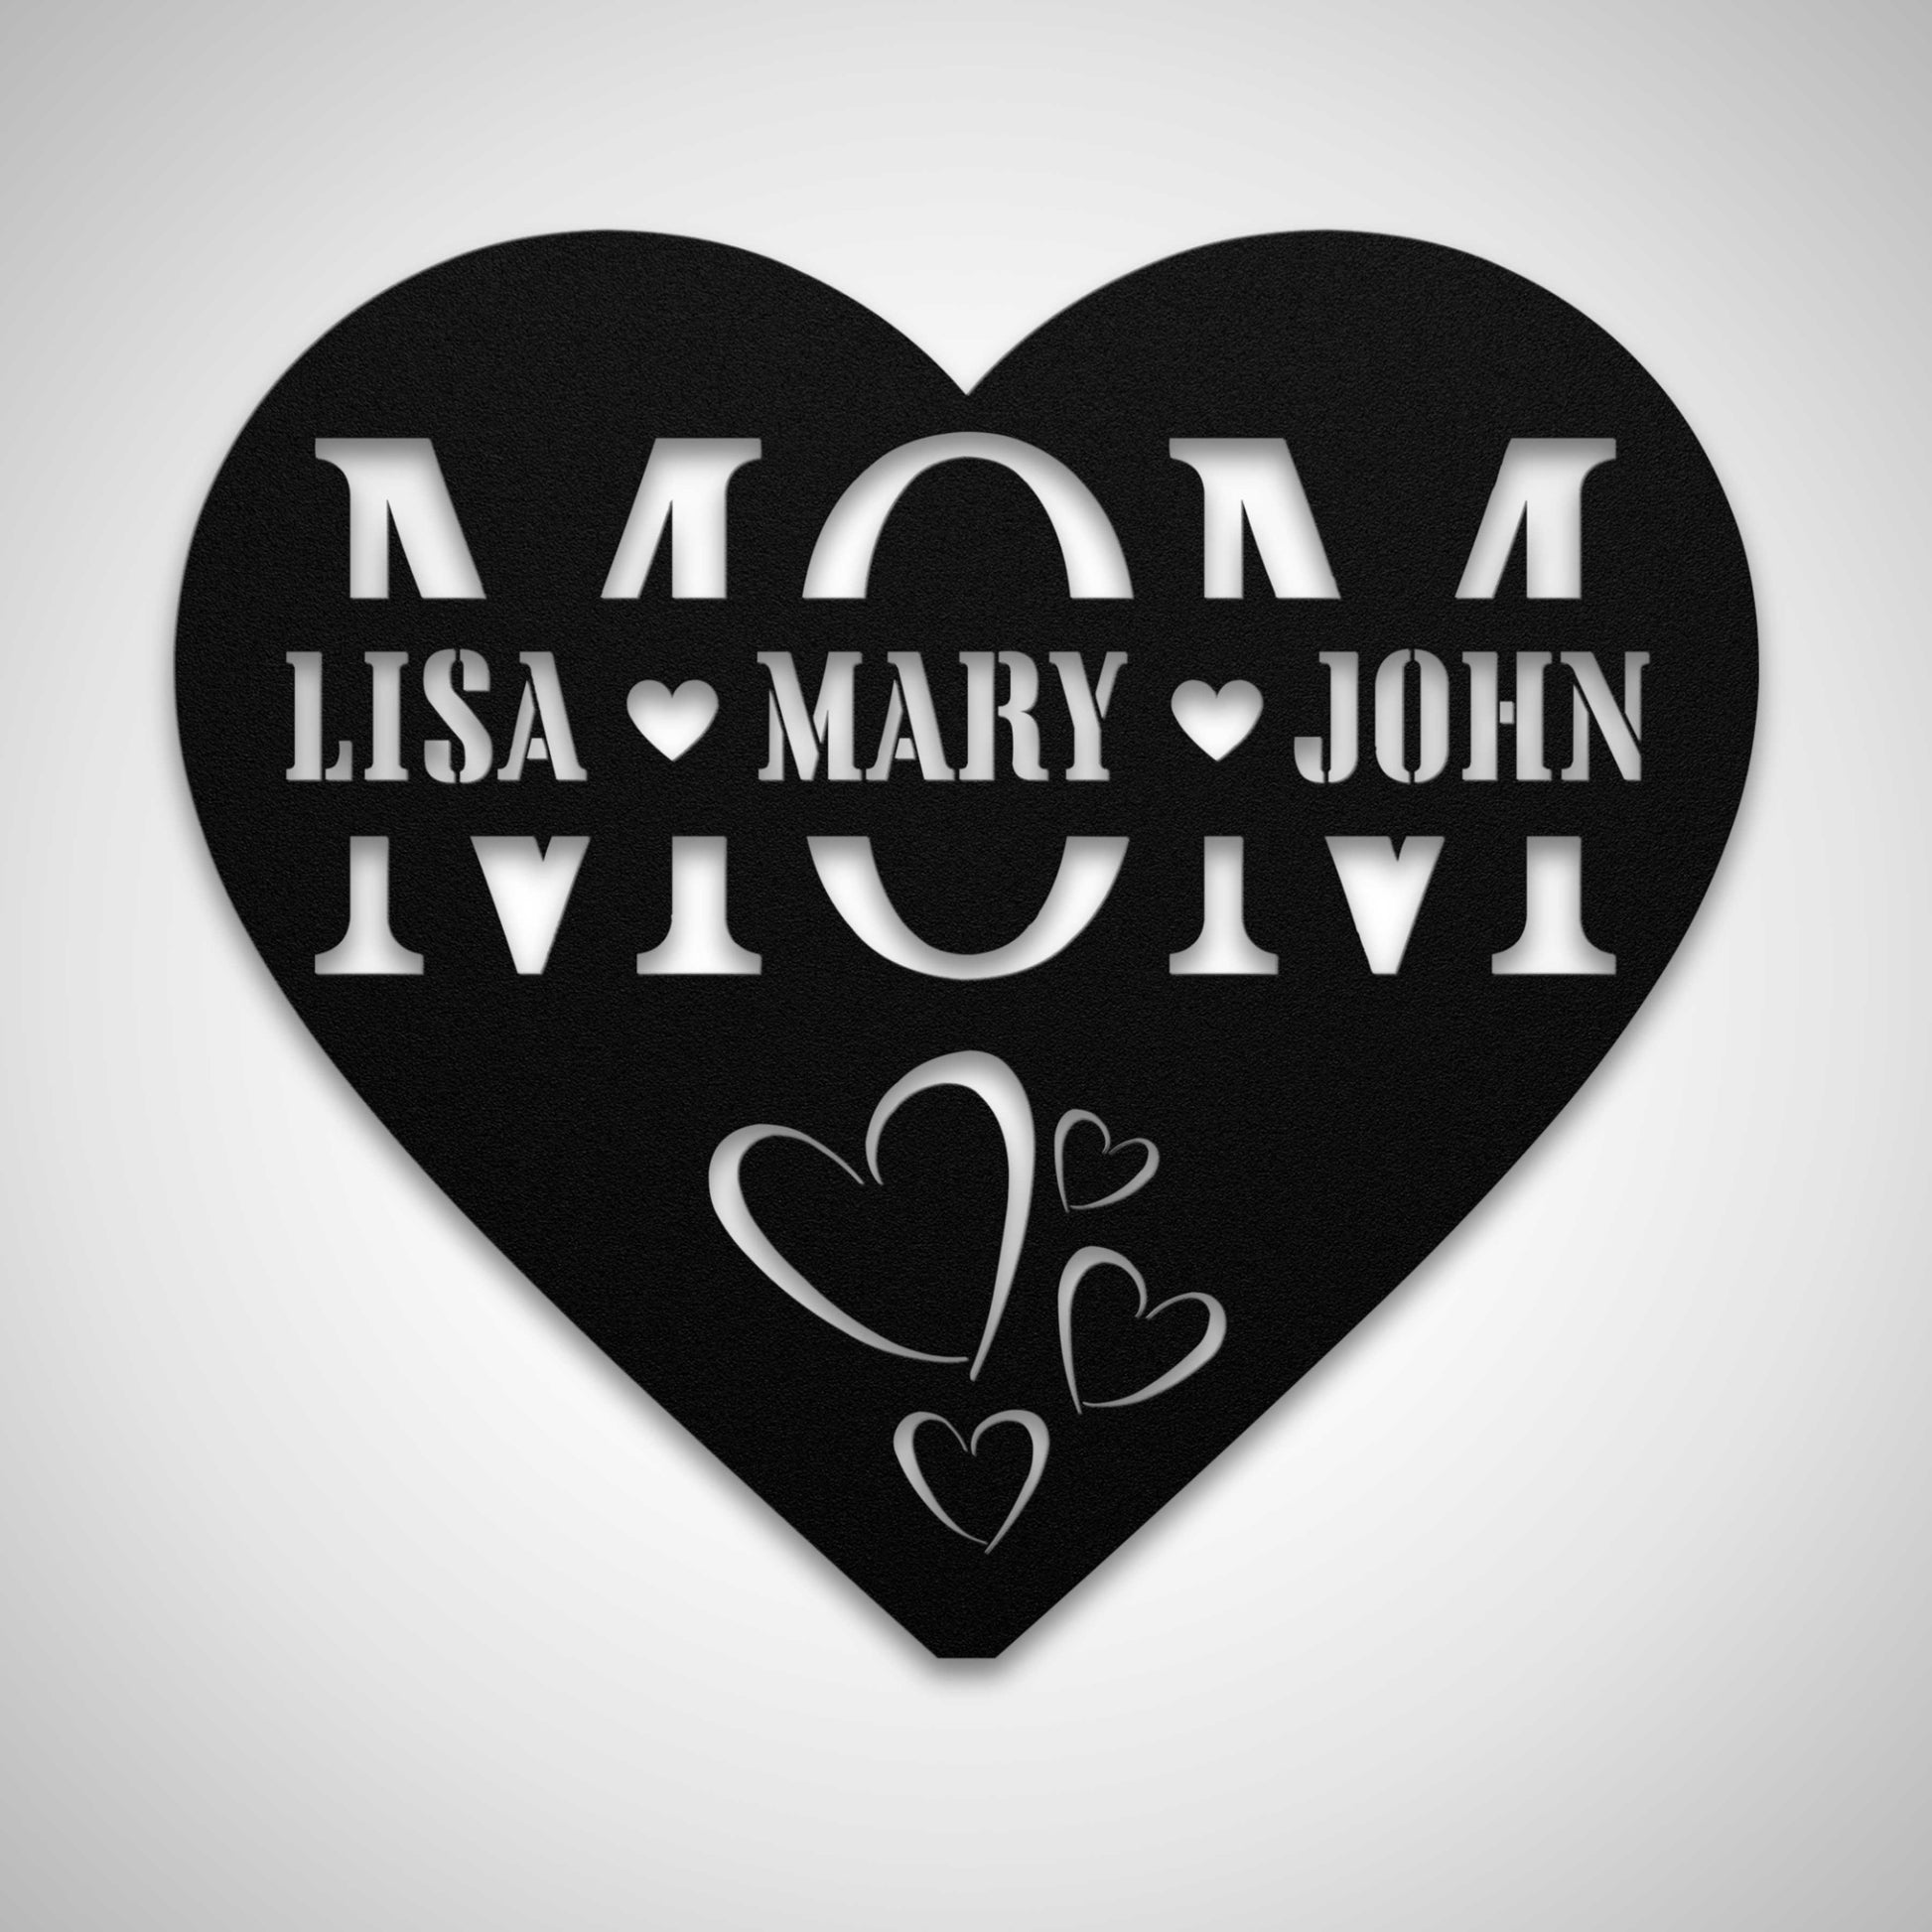 Personalized Heart Sign for Mom with Children's Names